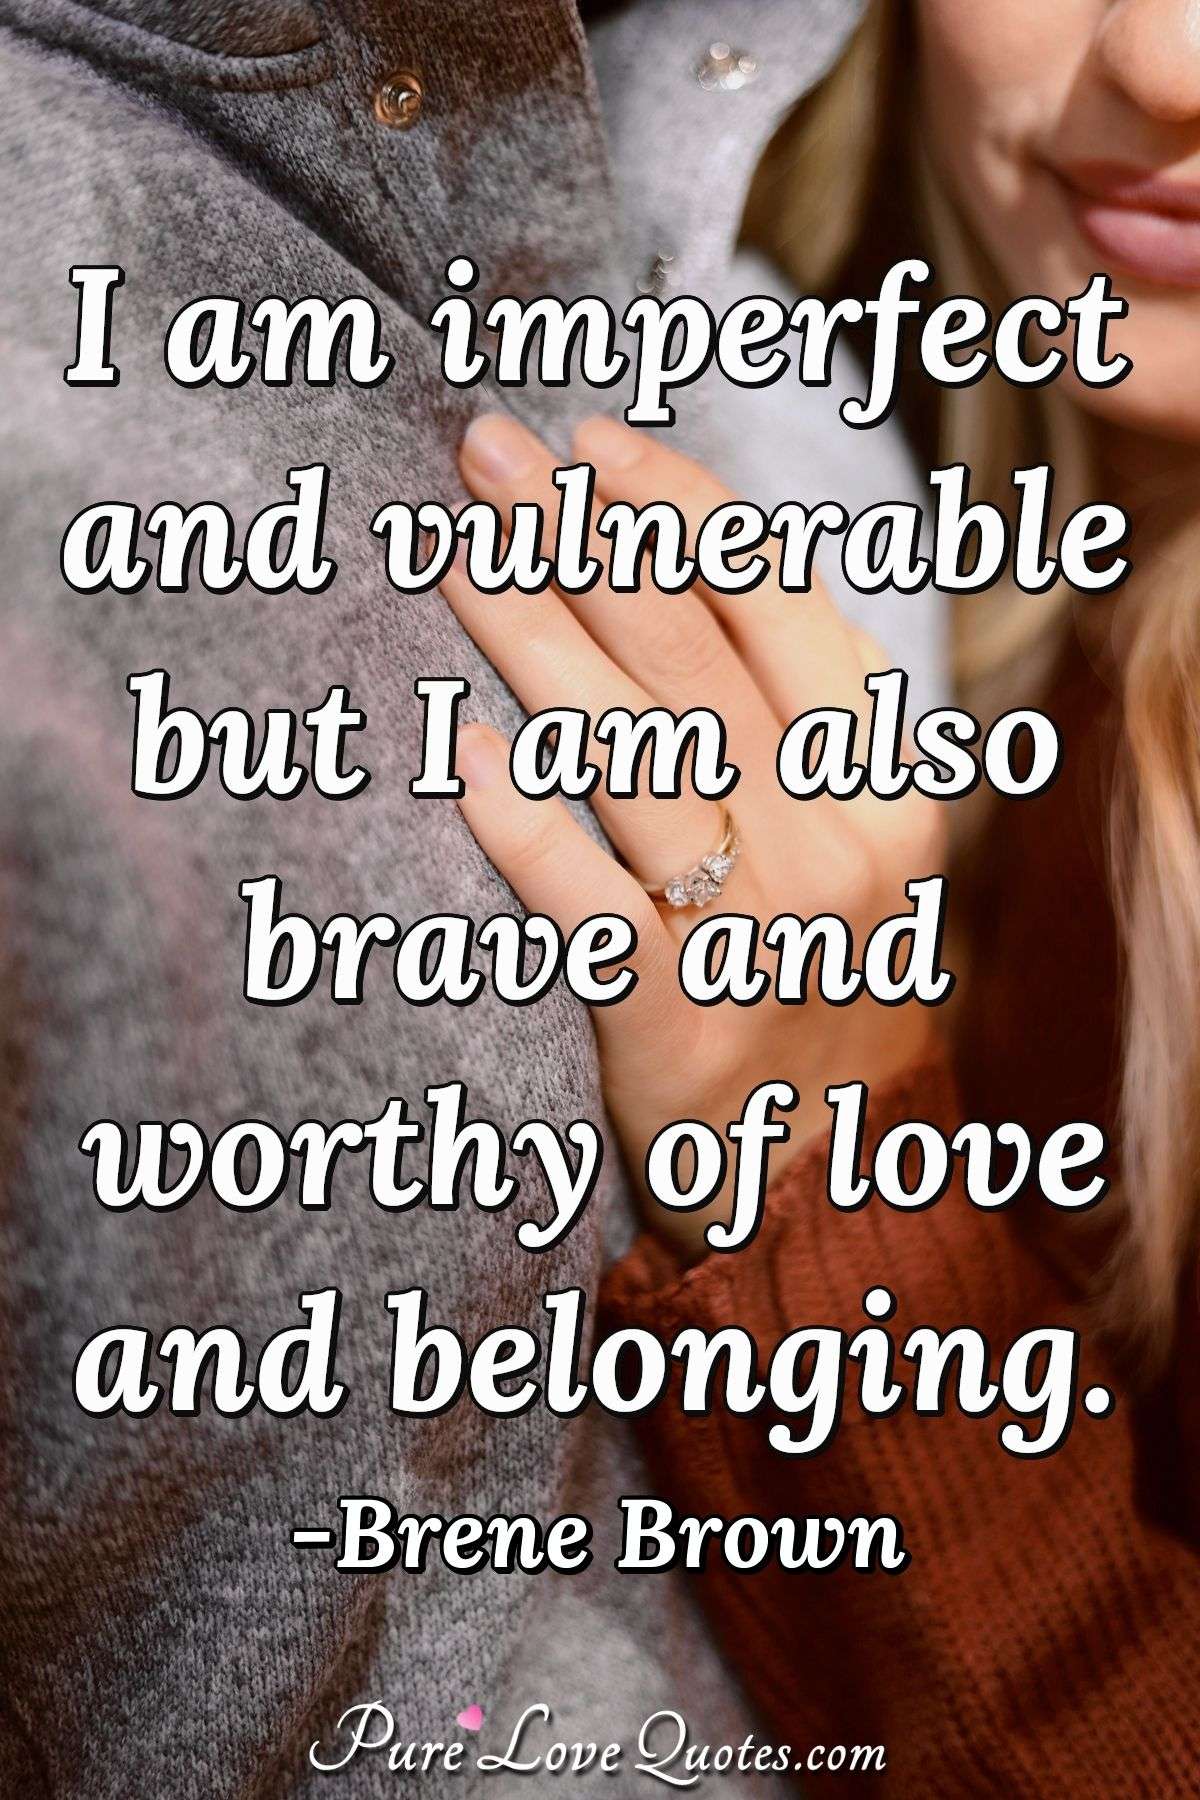 I am imperfect and vulnerable but I am also brave and worthy of love and belonging. - Brene Brown